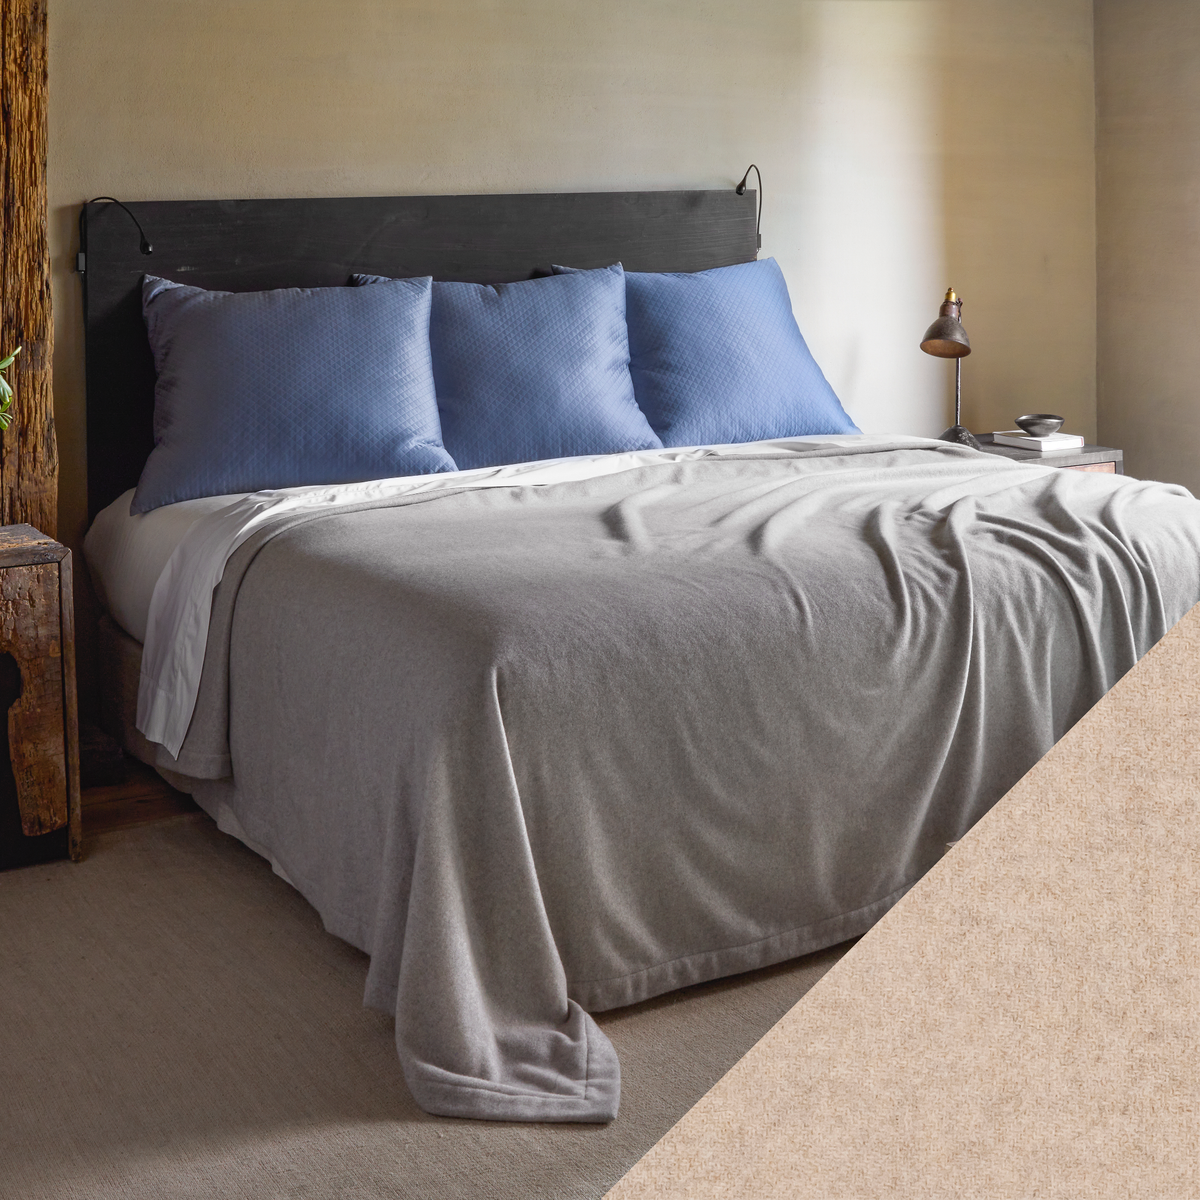 Lifestyle Full Bedding of Matouk Venus Collection in Dune Color